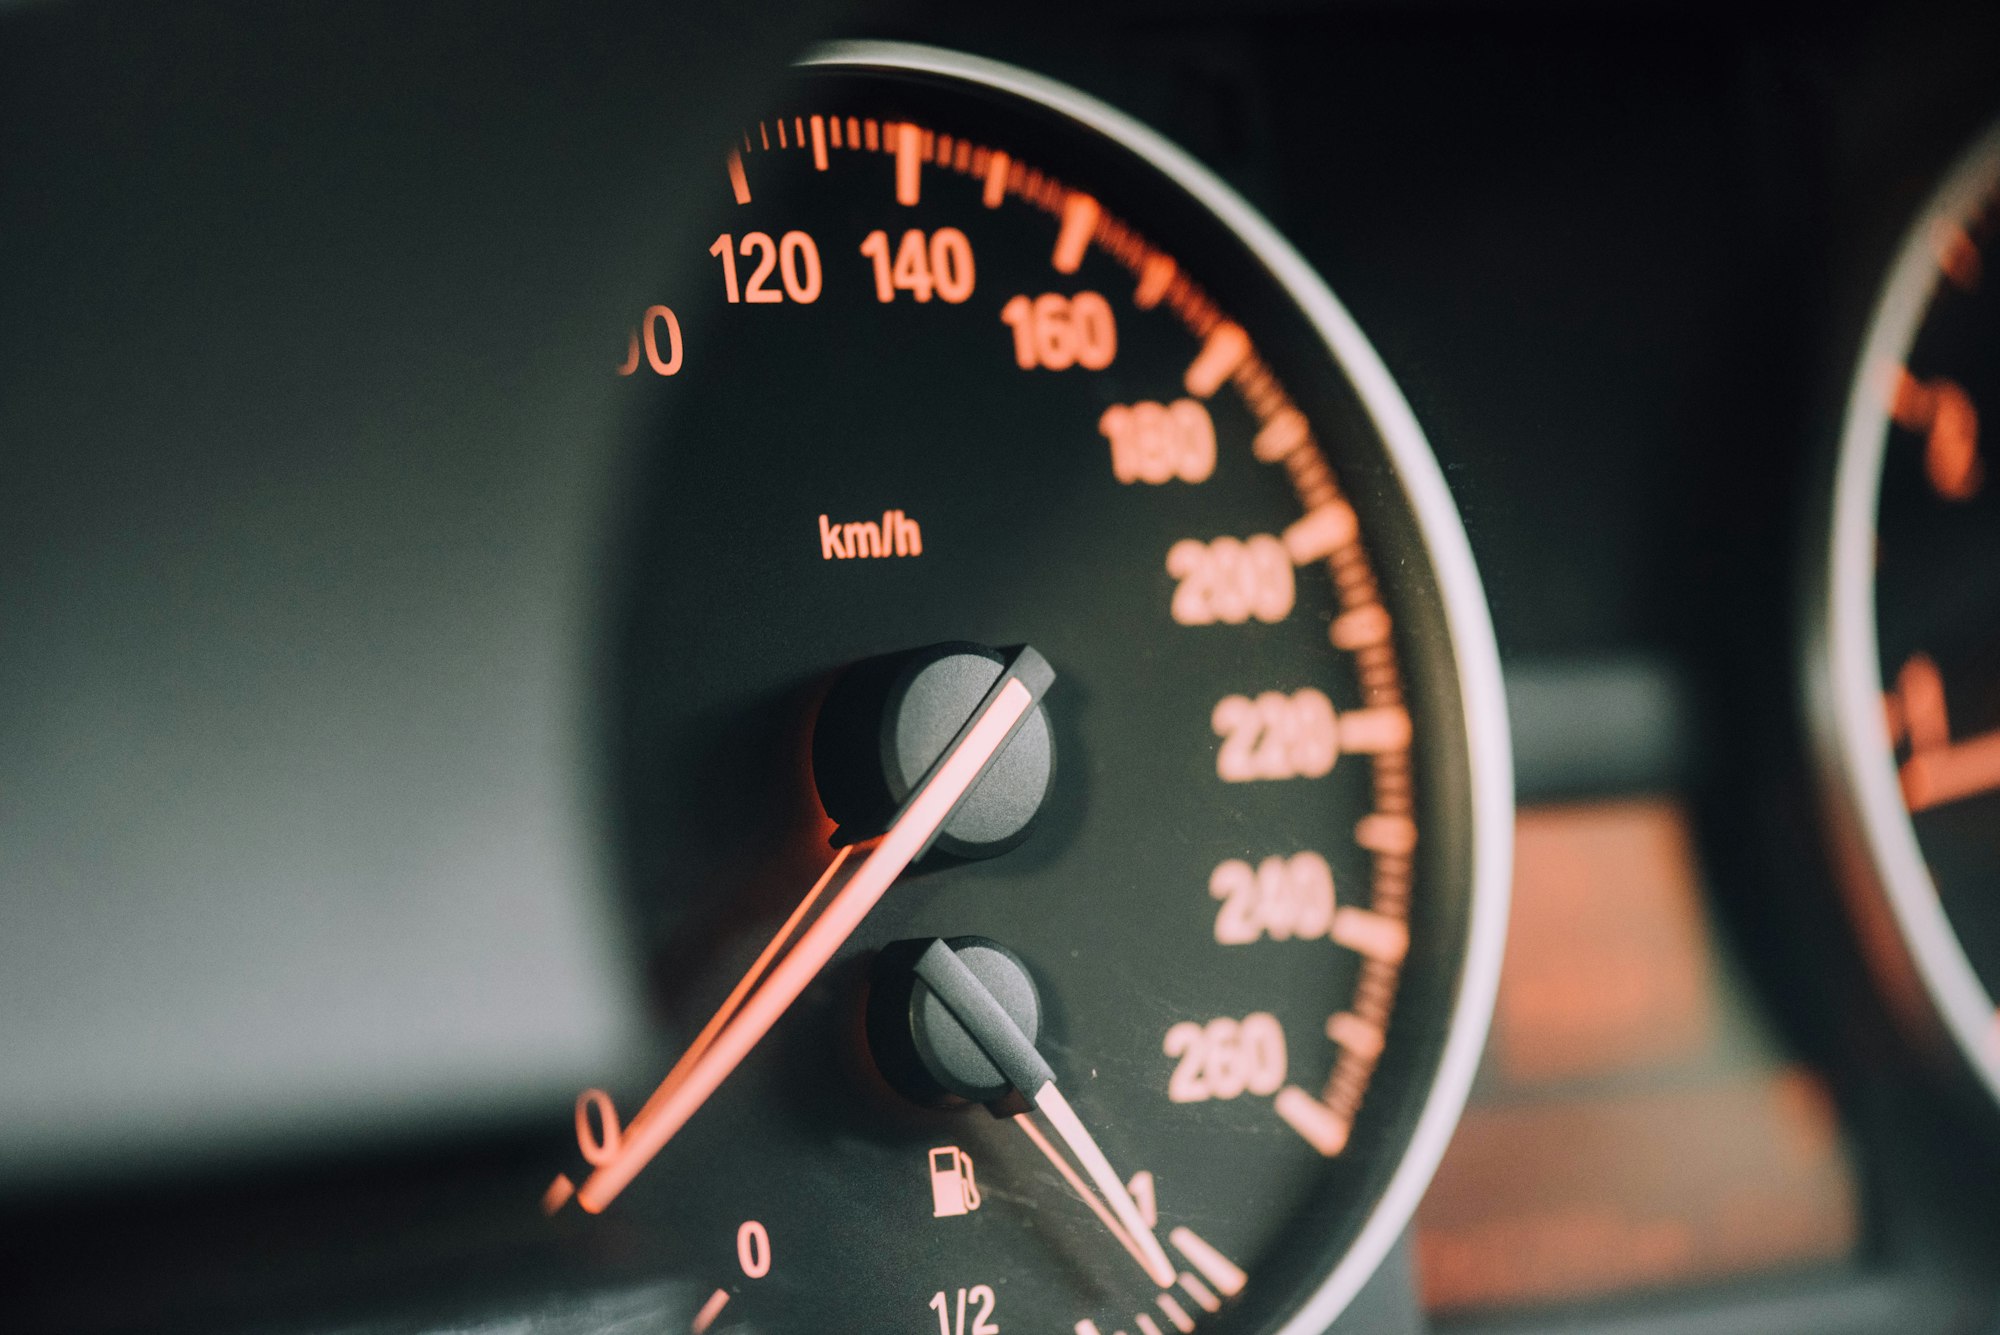 Photograph for FindByPlate of a speedometer– https://findbyplate.com/